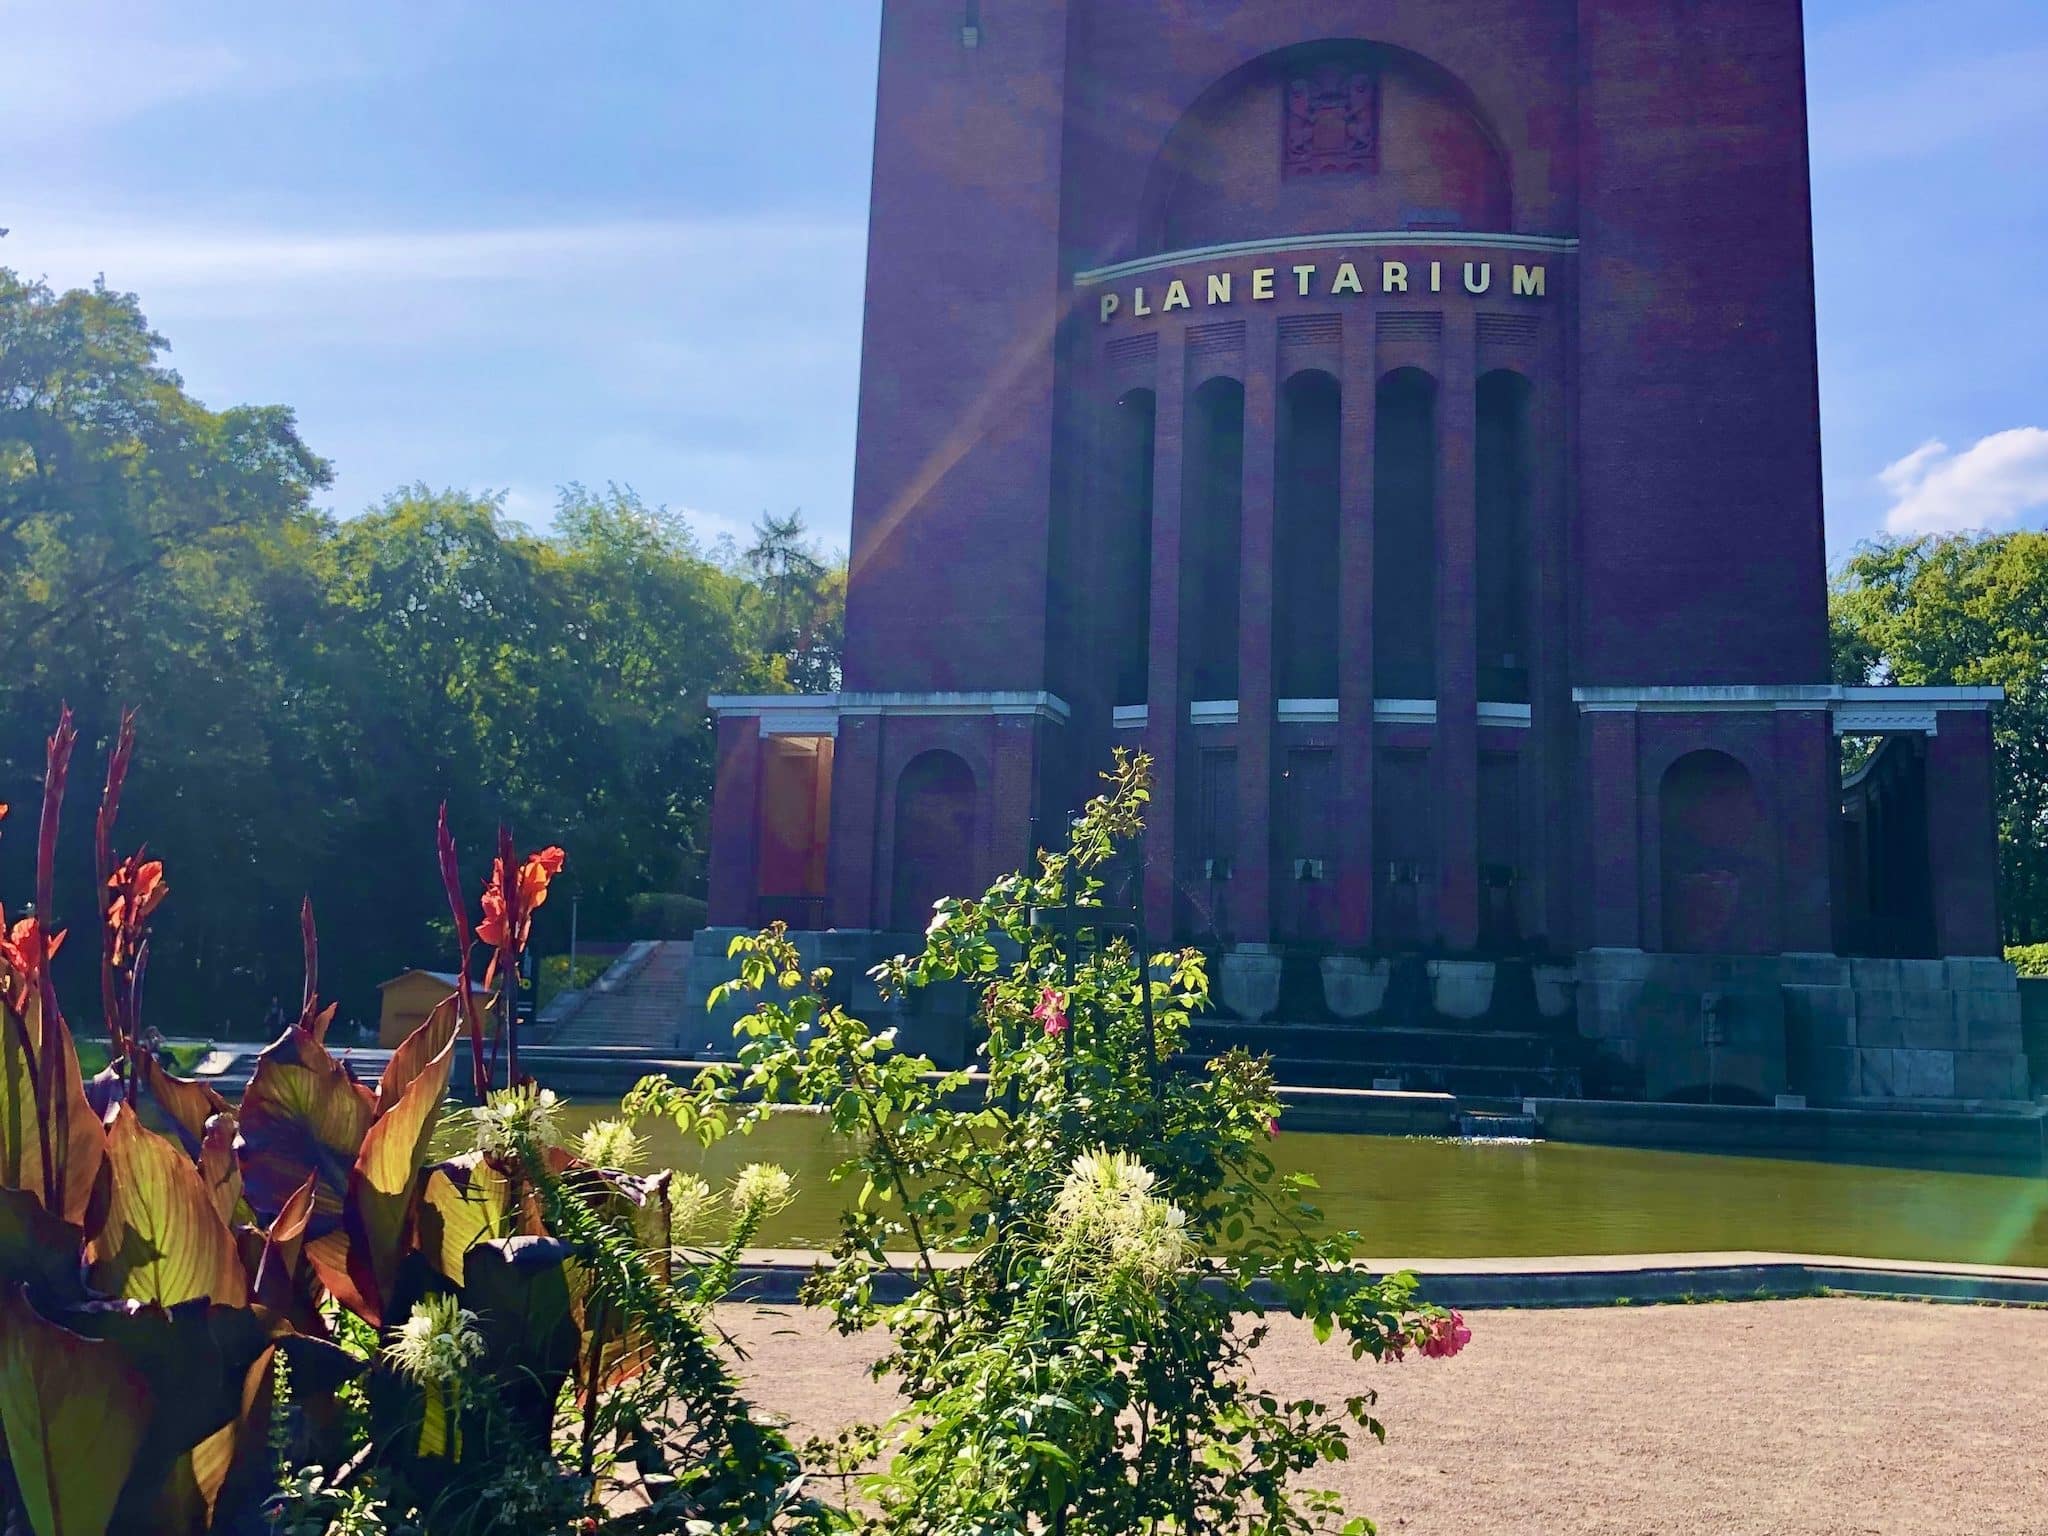 When jogging in the city park you can walk past the planetarium. Photo: Sascha Tegtmeyer